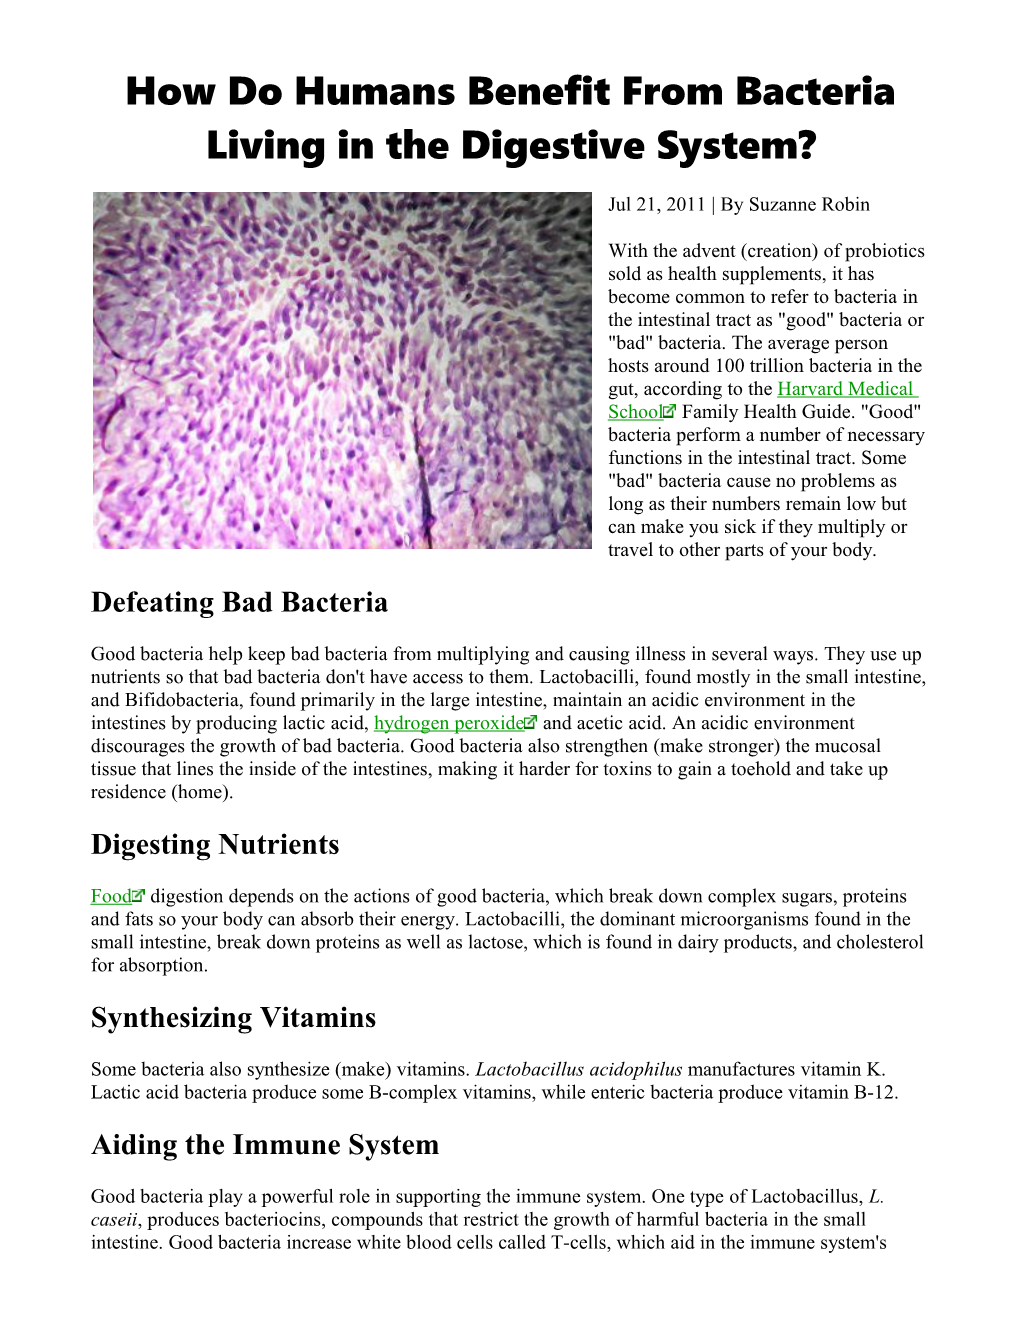 How Do Humans Benefit from Bacteria Living in the Digestive System?